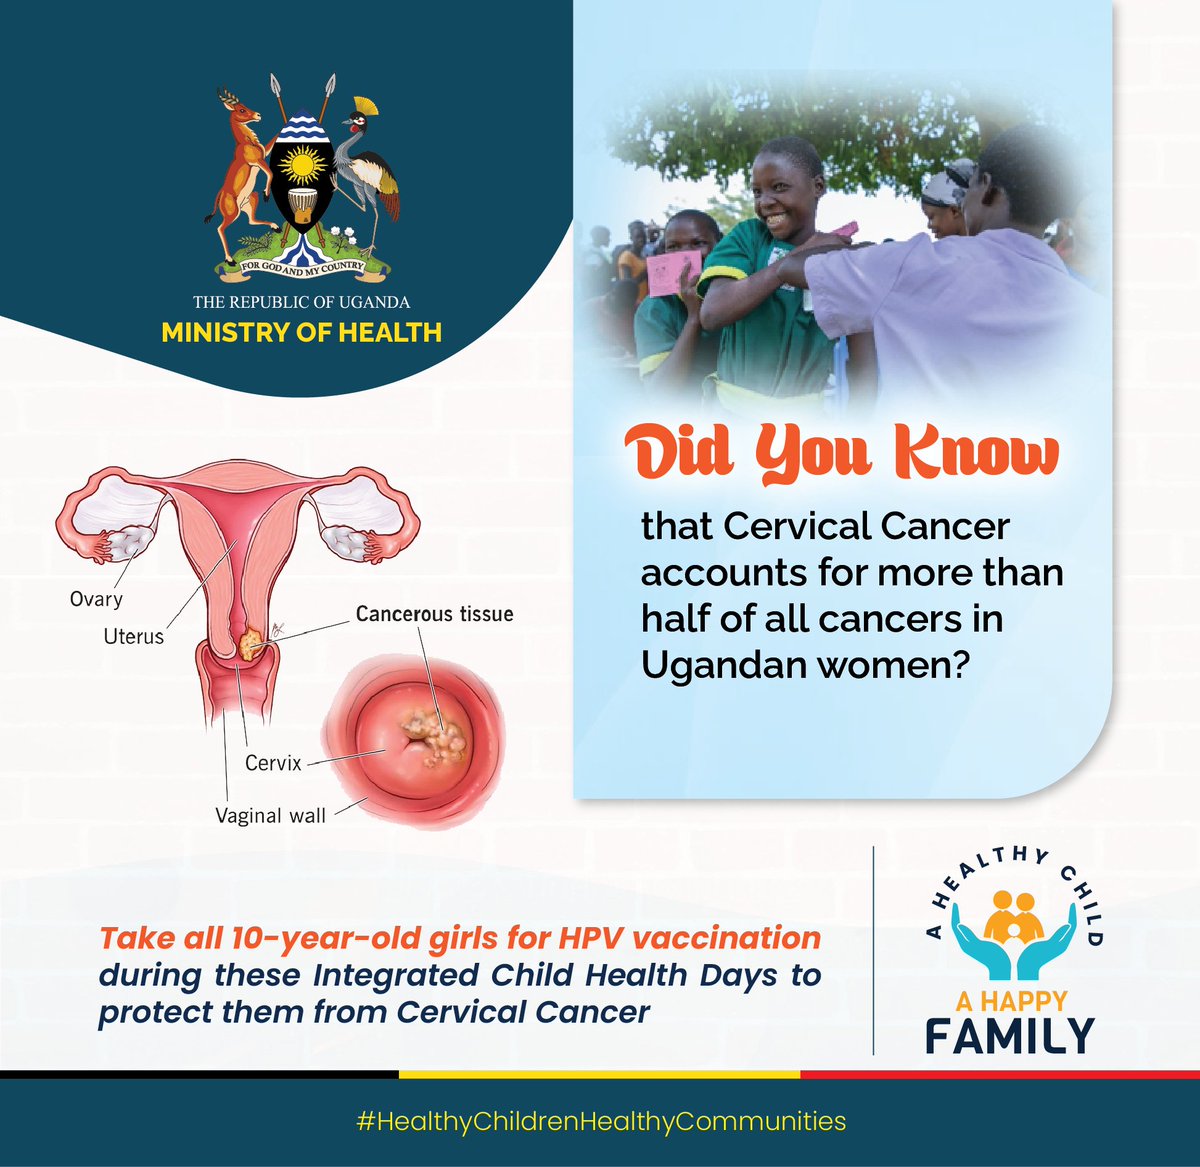 @MinofHealthUG Did you know that Cervical Cancer is responsible for over 50% of all cancers amongst Ugandan women? Let's act now & take all 10 year old girls for HPV vaccination during Integrated Child Health Days. Let's work towards
#MOHWorks